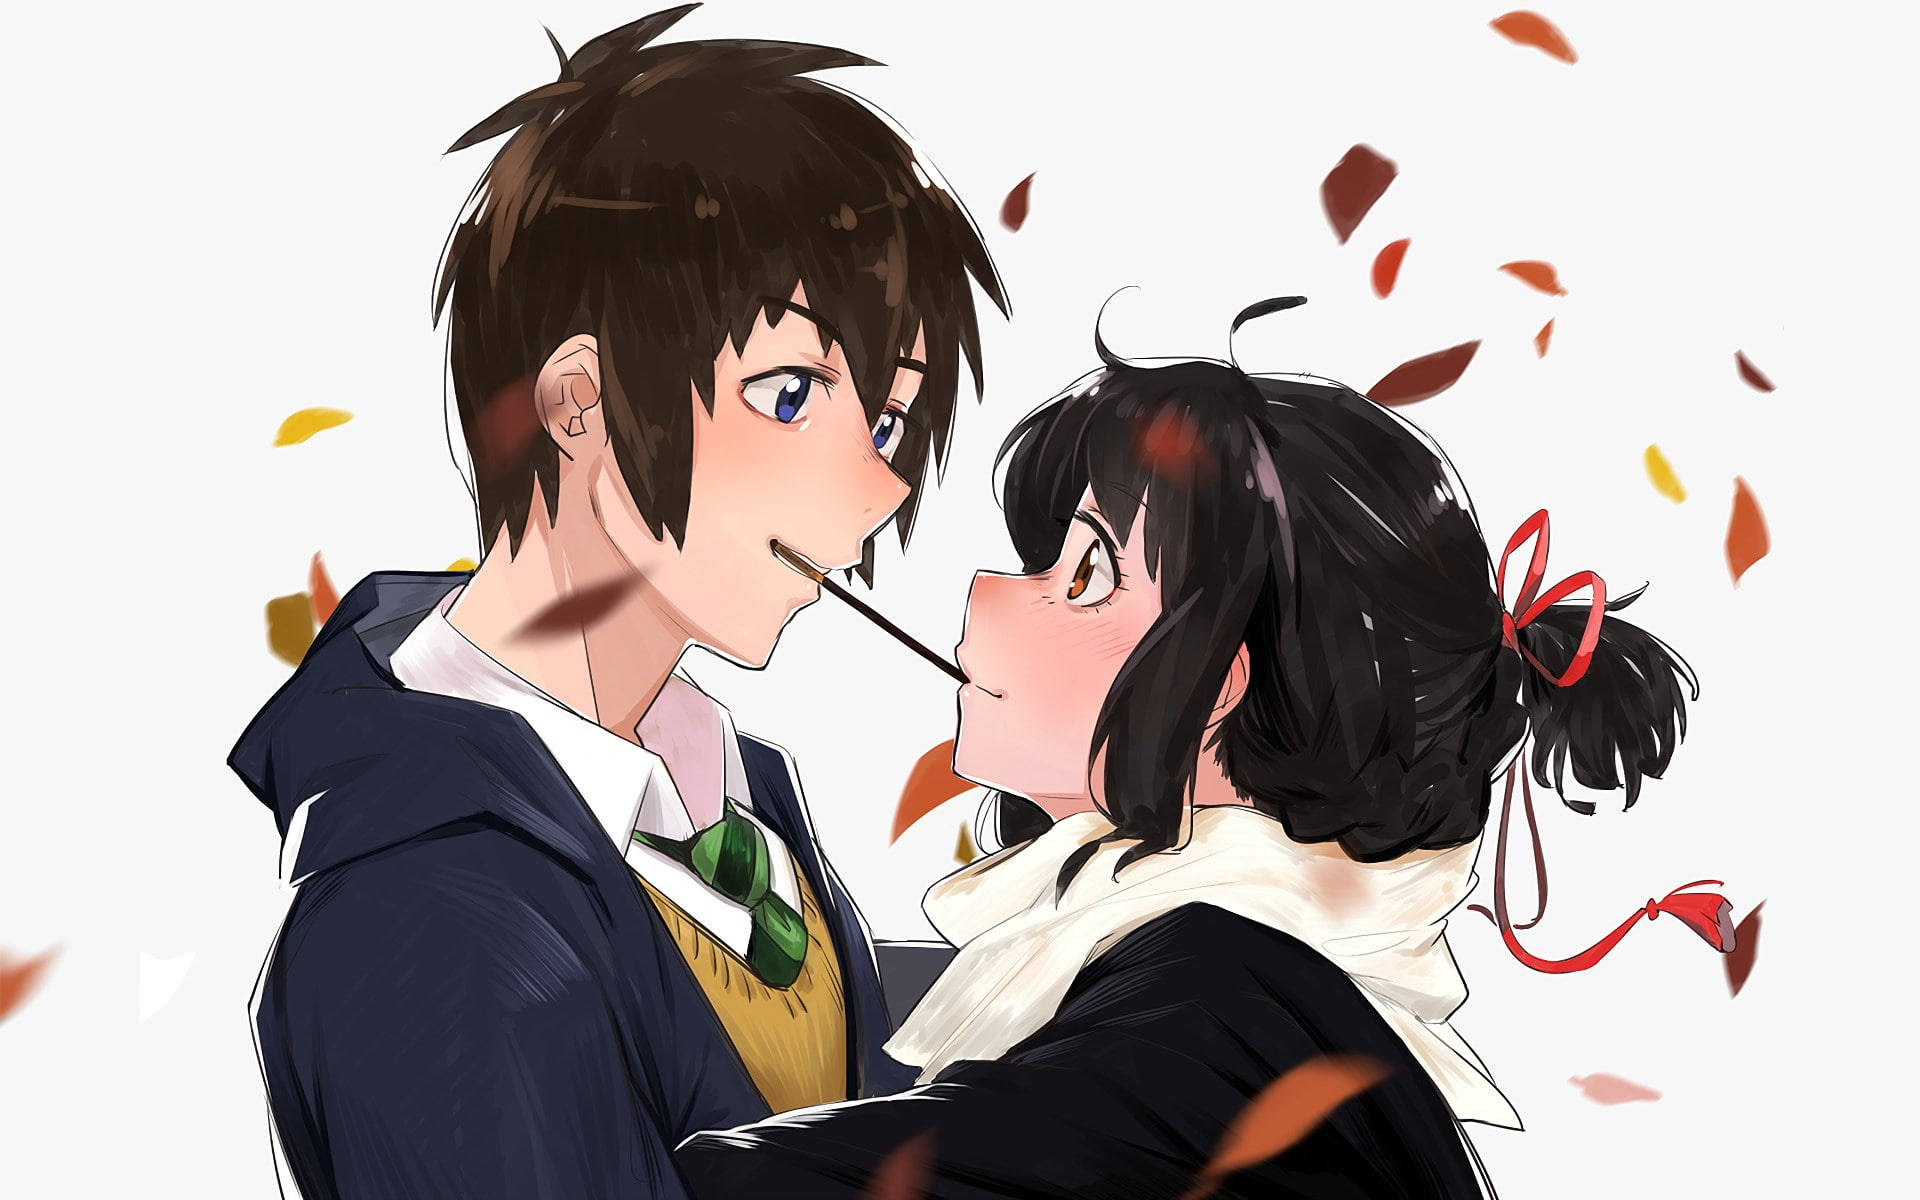 Cute Anime Couple Sharing A Snack